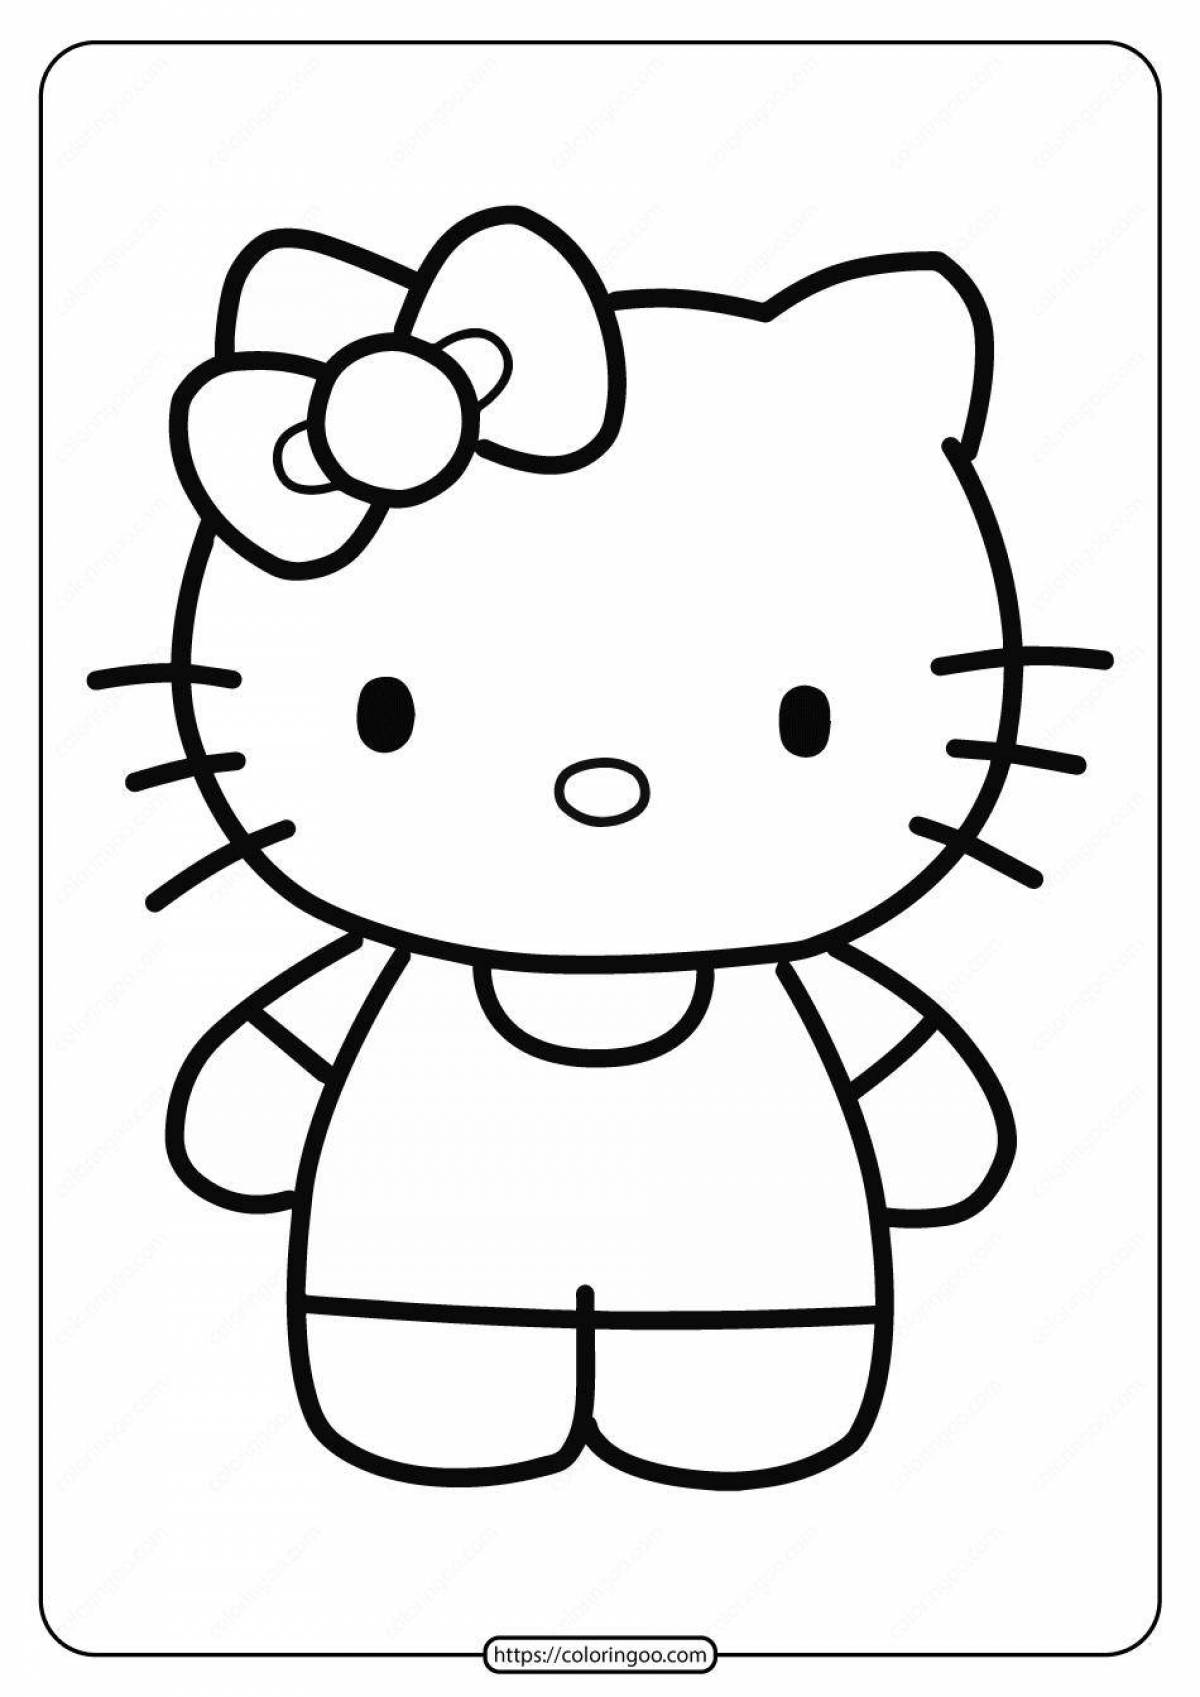 Colorful hello kitty face coloring page